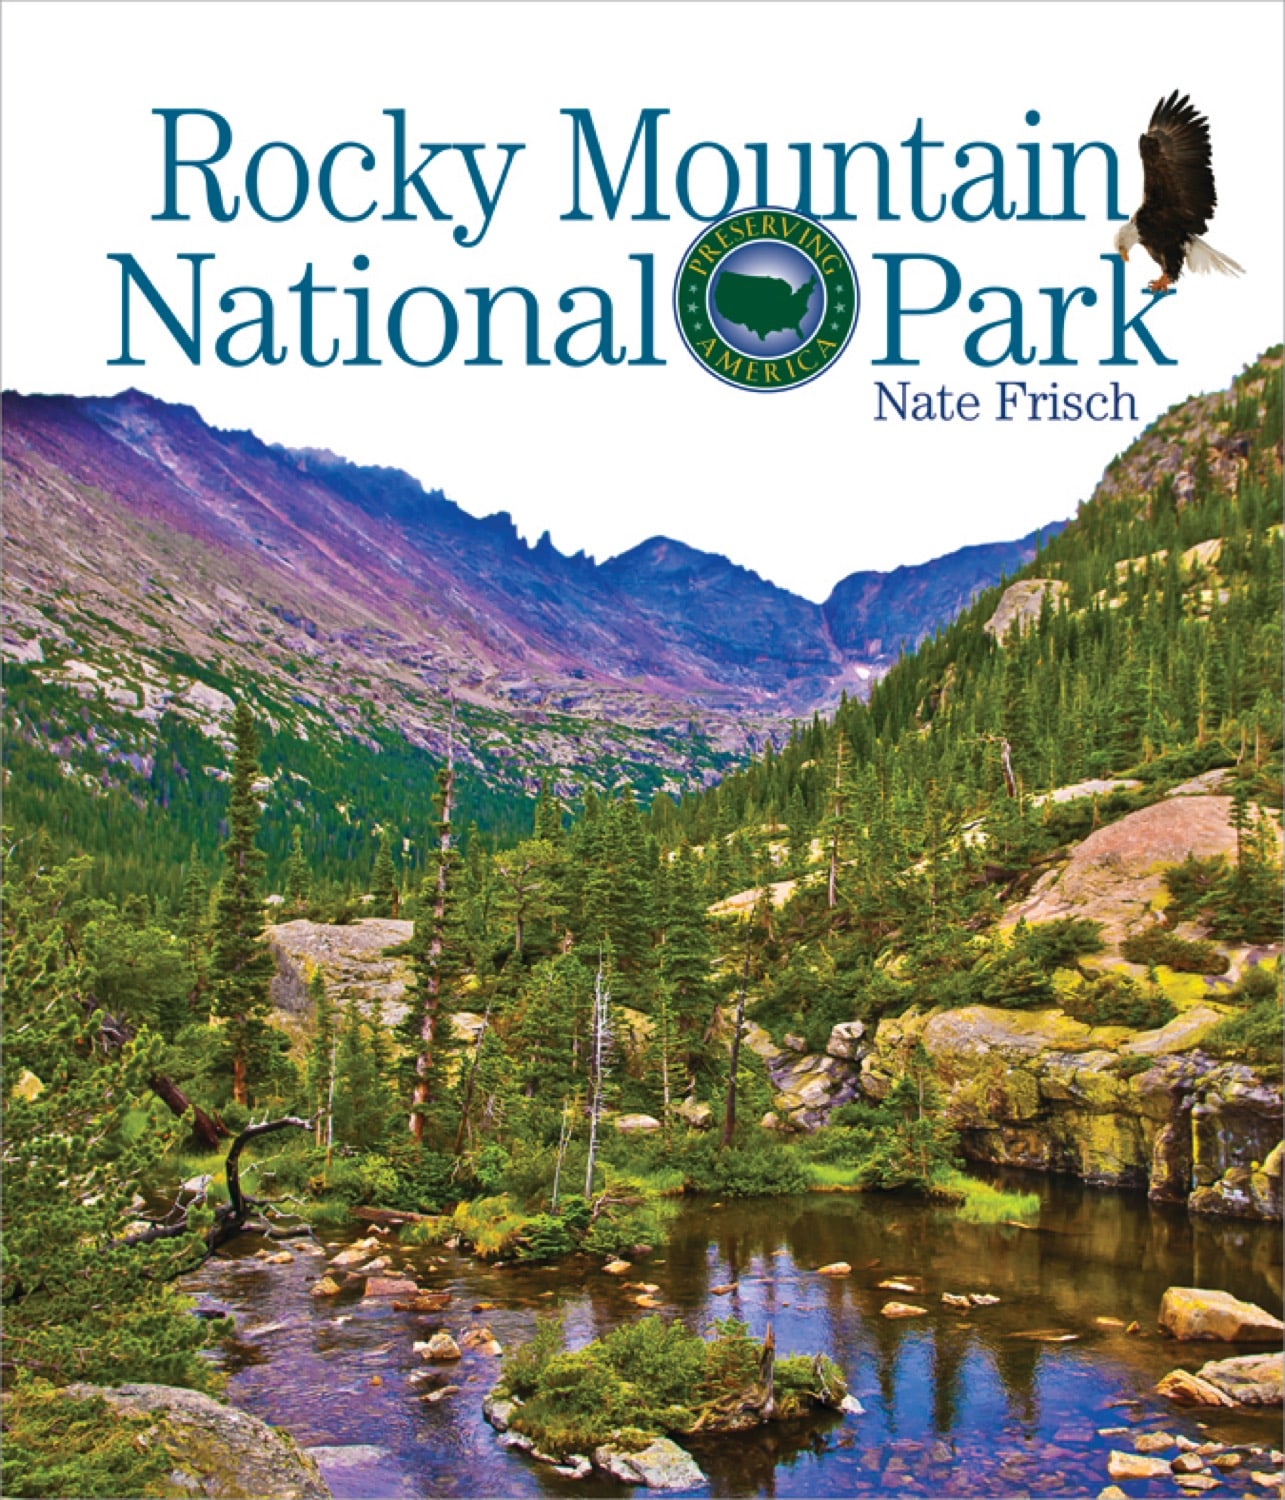 Preserving America: Rocky Mountain National Park